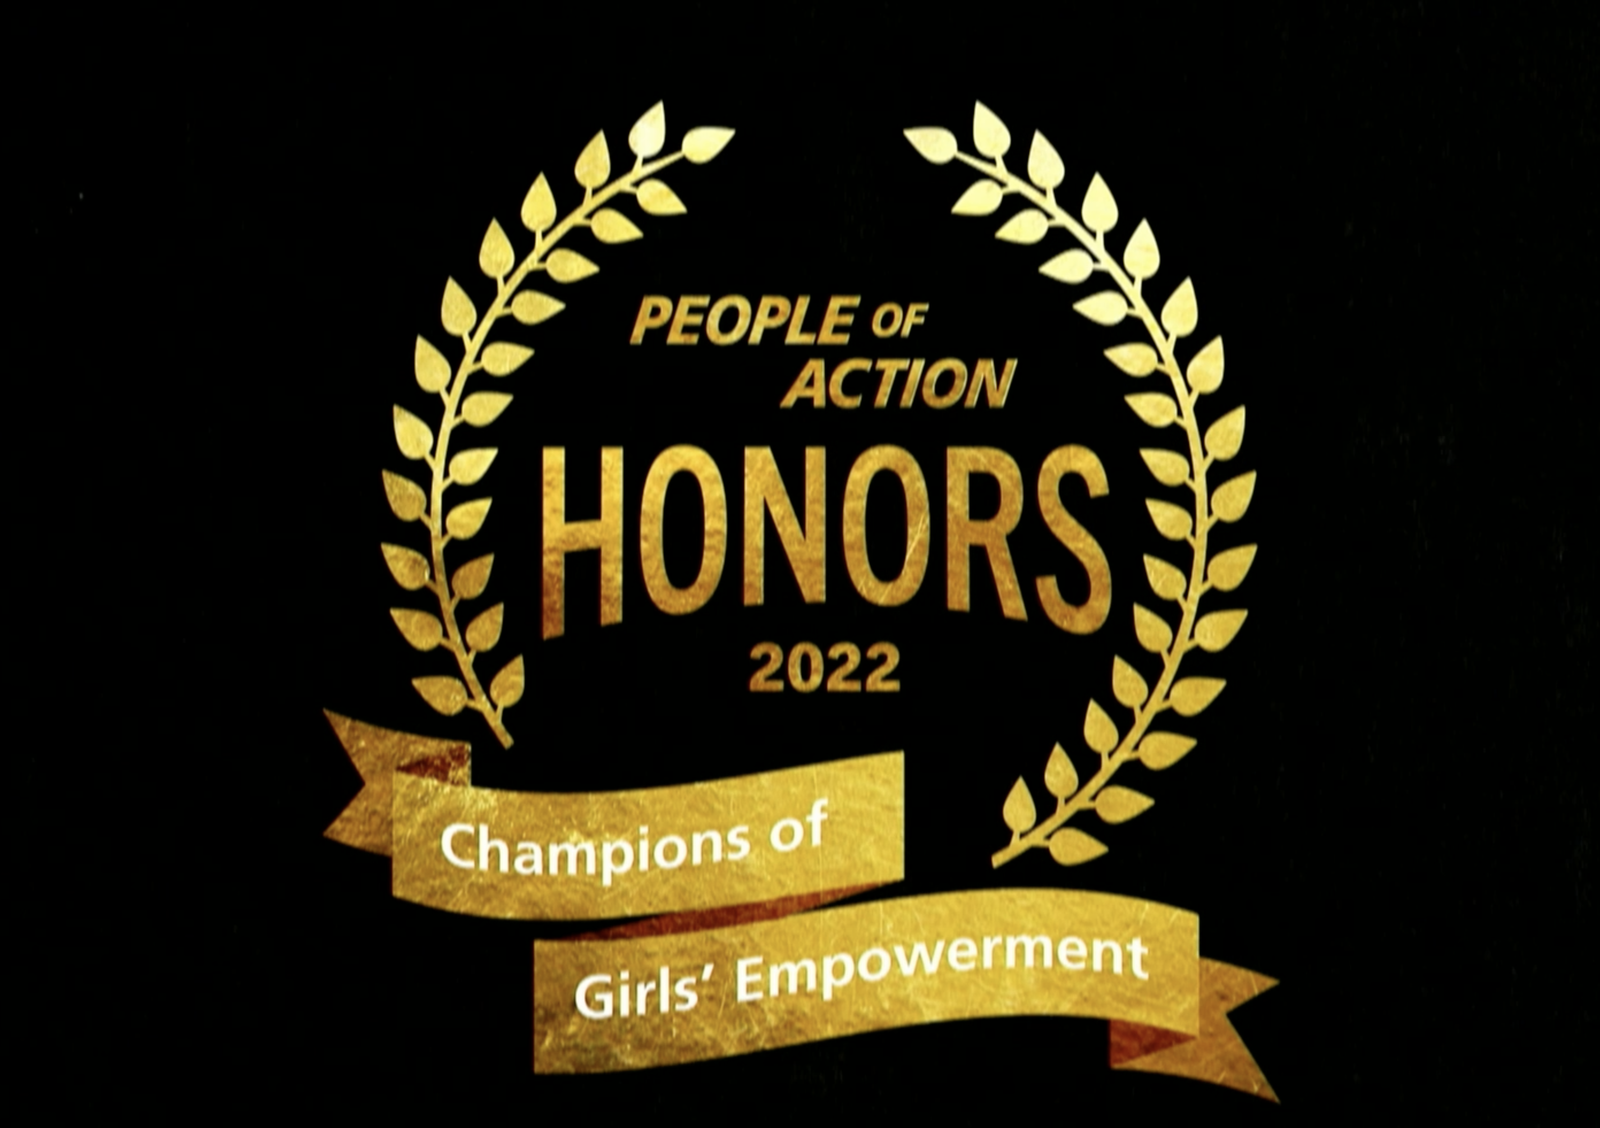 2022, people of action, champions of girls empowerment, convention houston